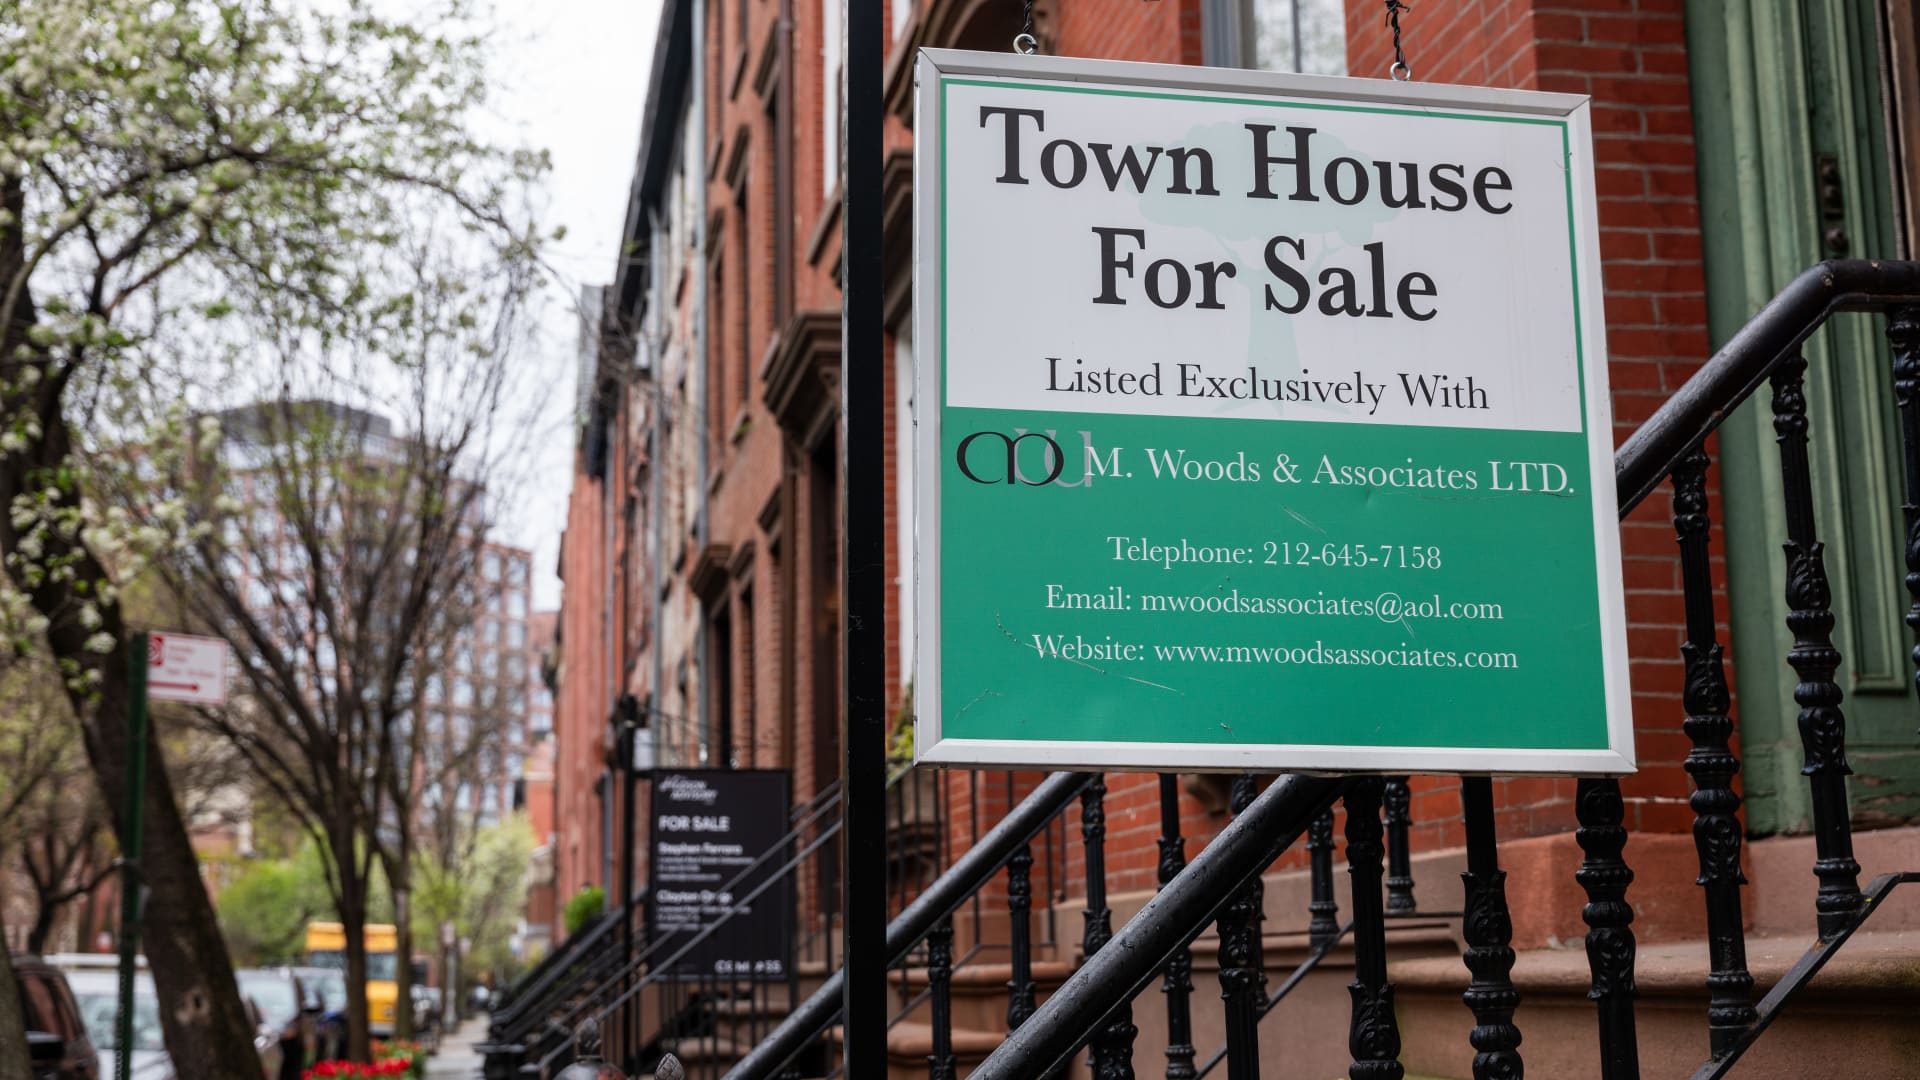 The dream of home ownership has gotten even further away for renters, with higher housing costs and elevated interest rates standing in the way of the